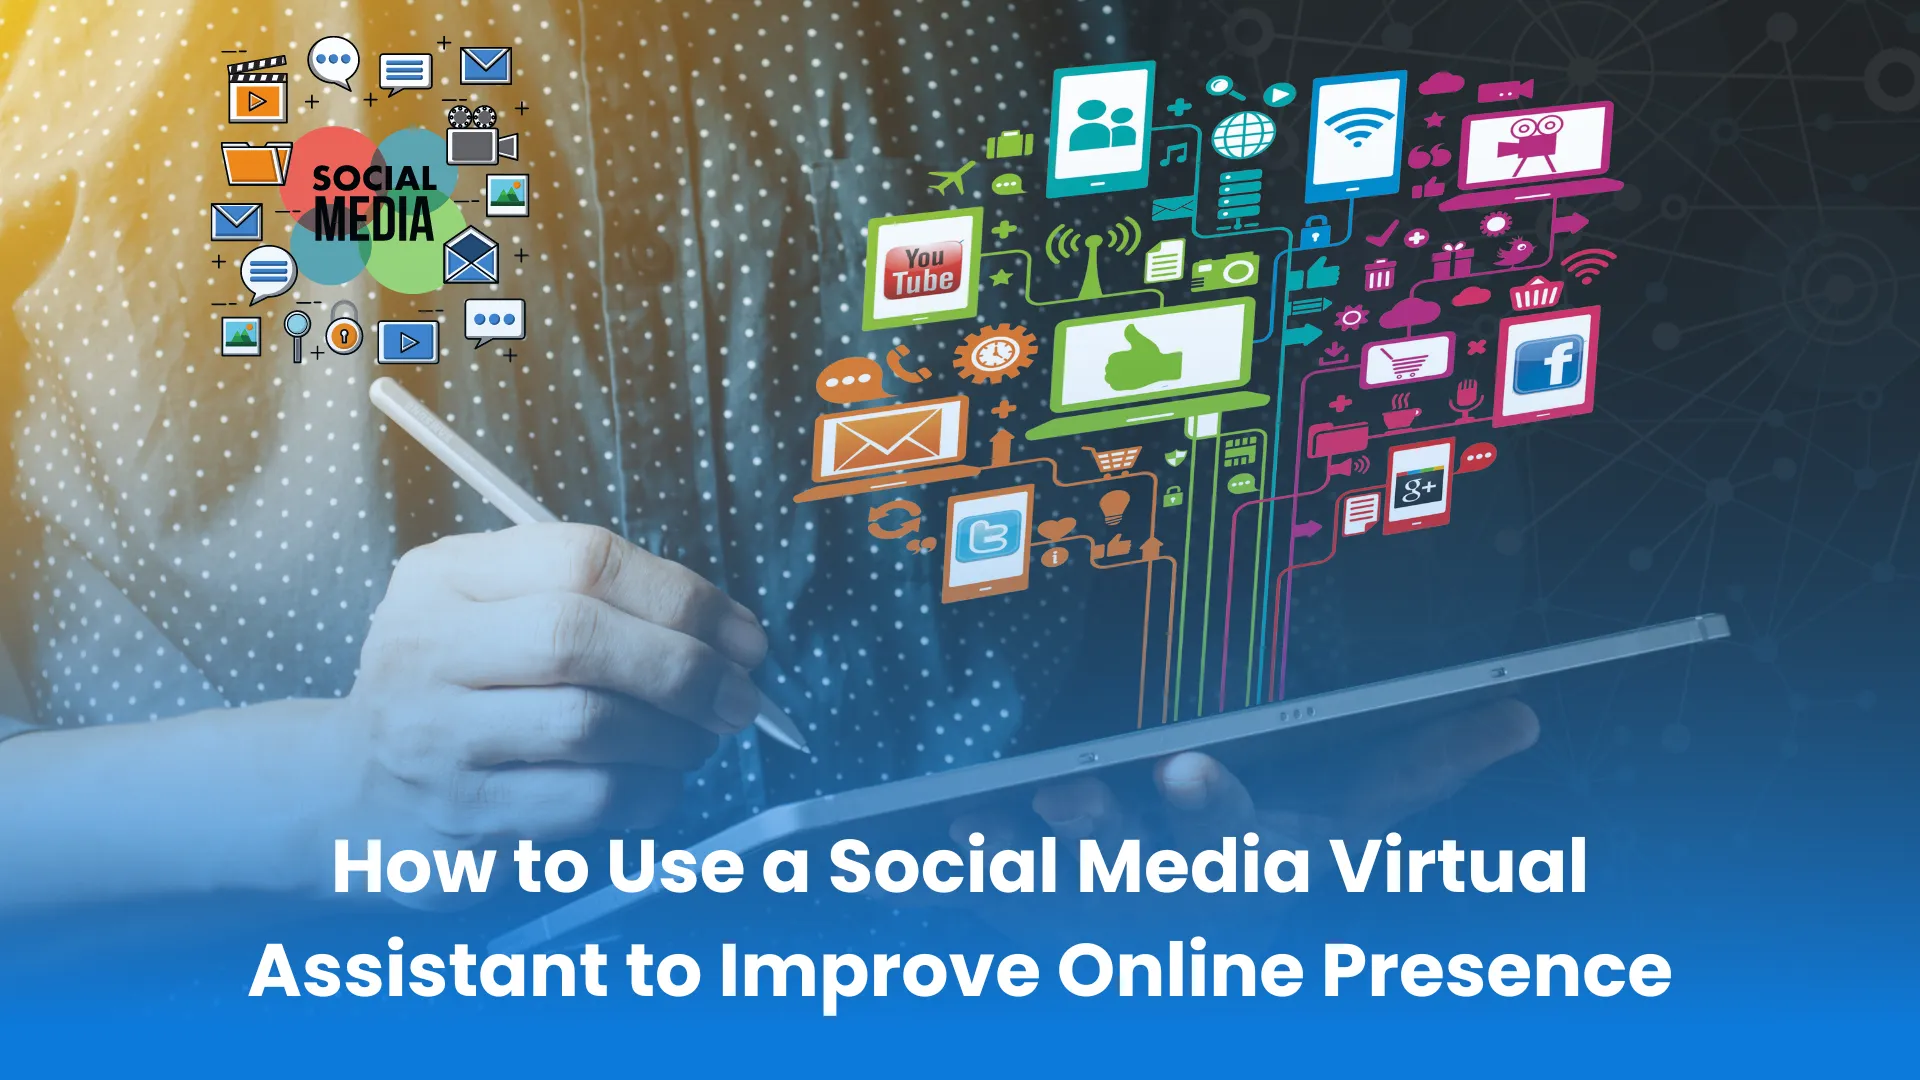 How to use a social media virtual assistant to boost online presence.